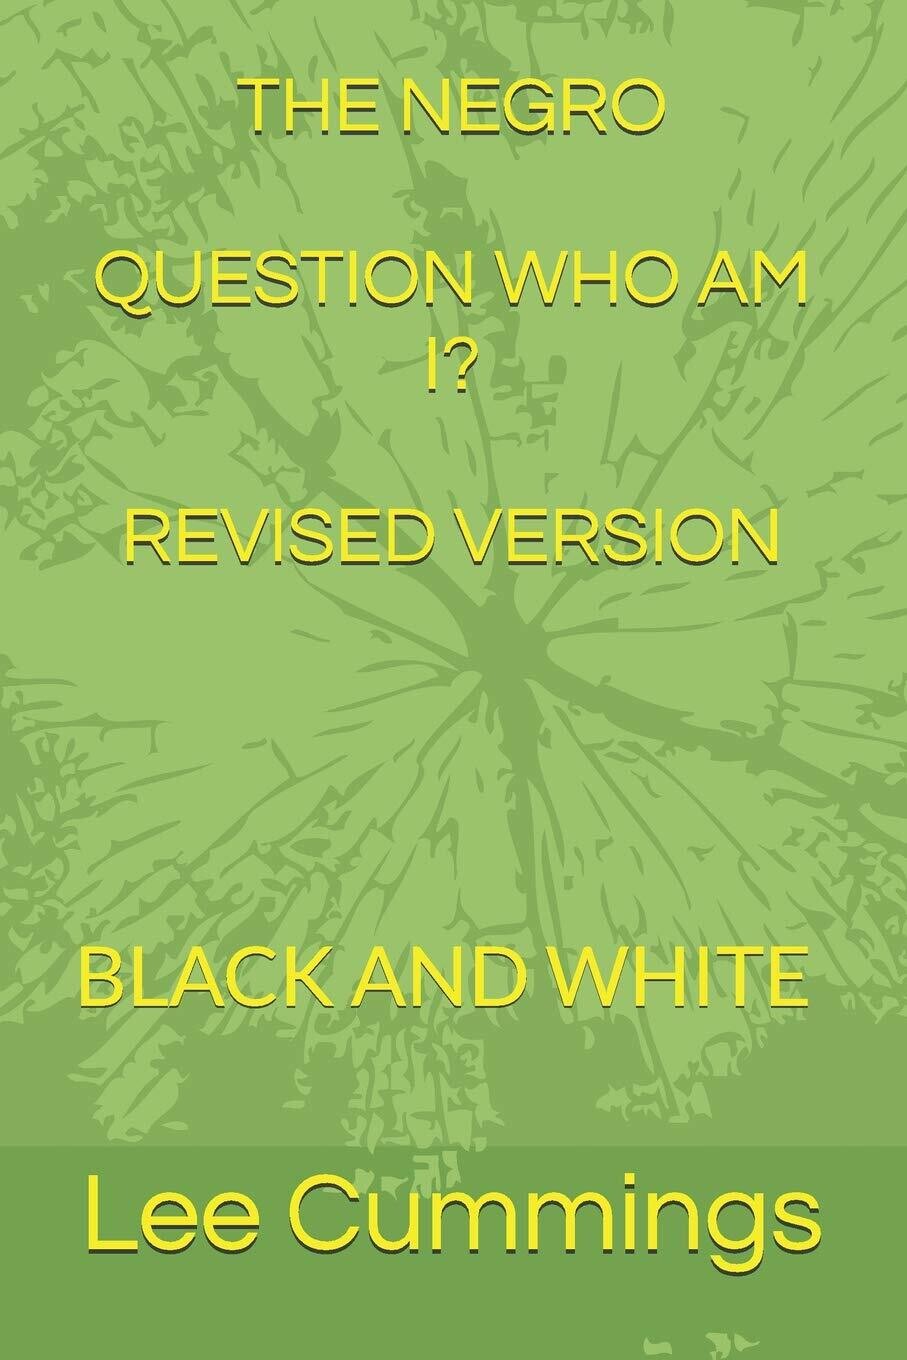 THE NEGRO QUESTION PART 1 - WHO AM I? - EBOOK